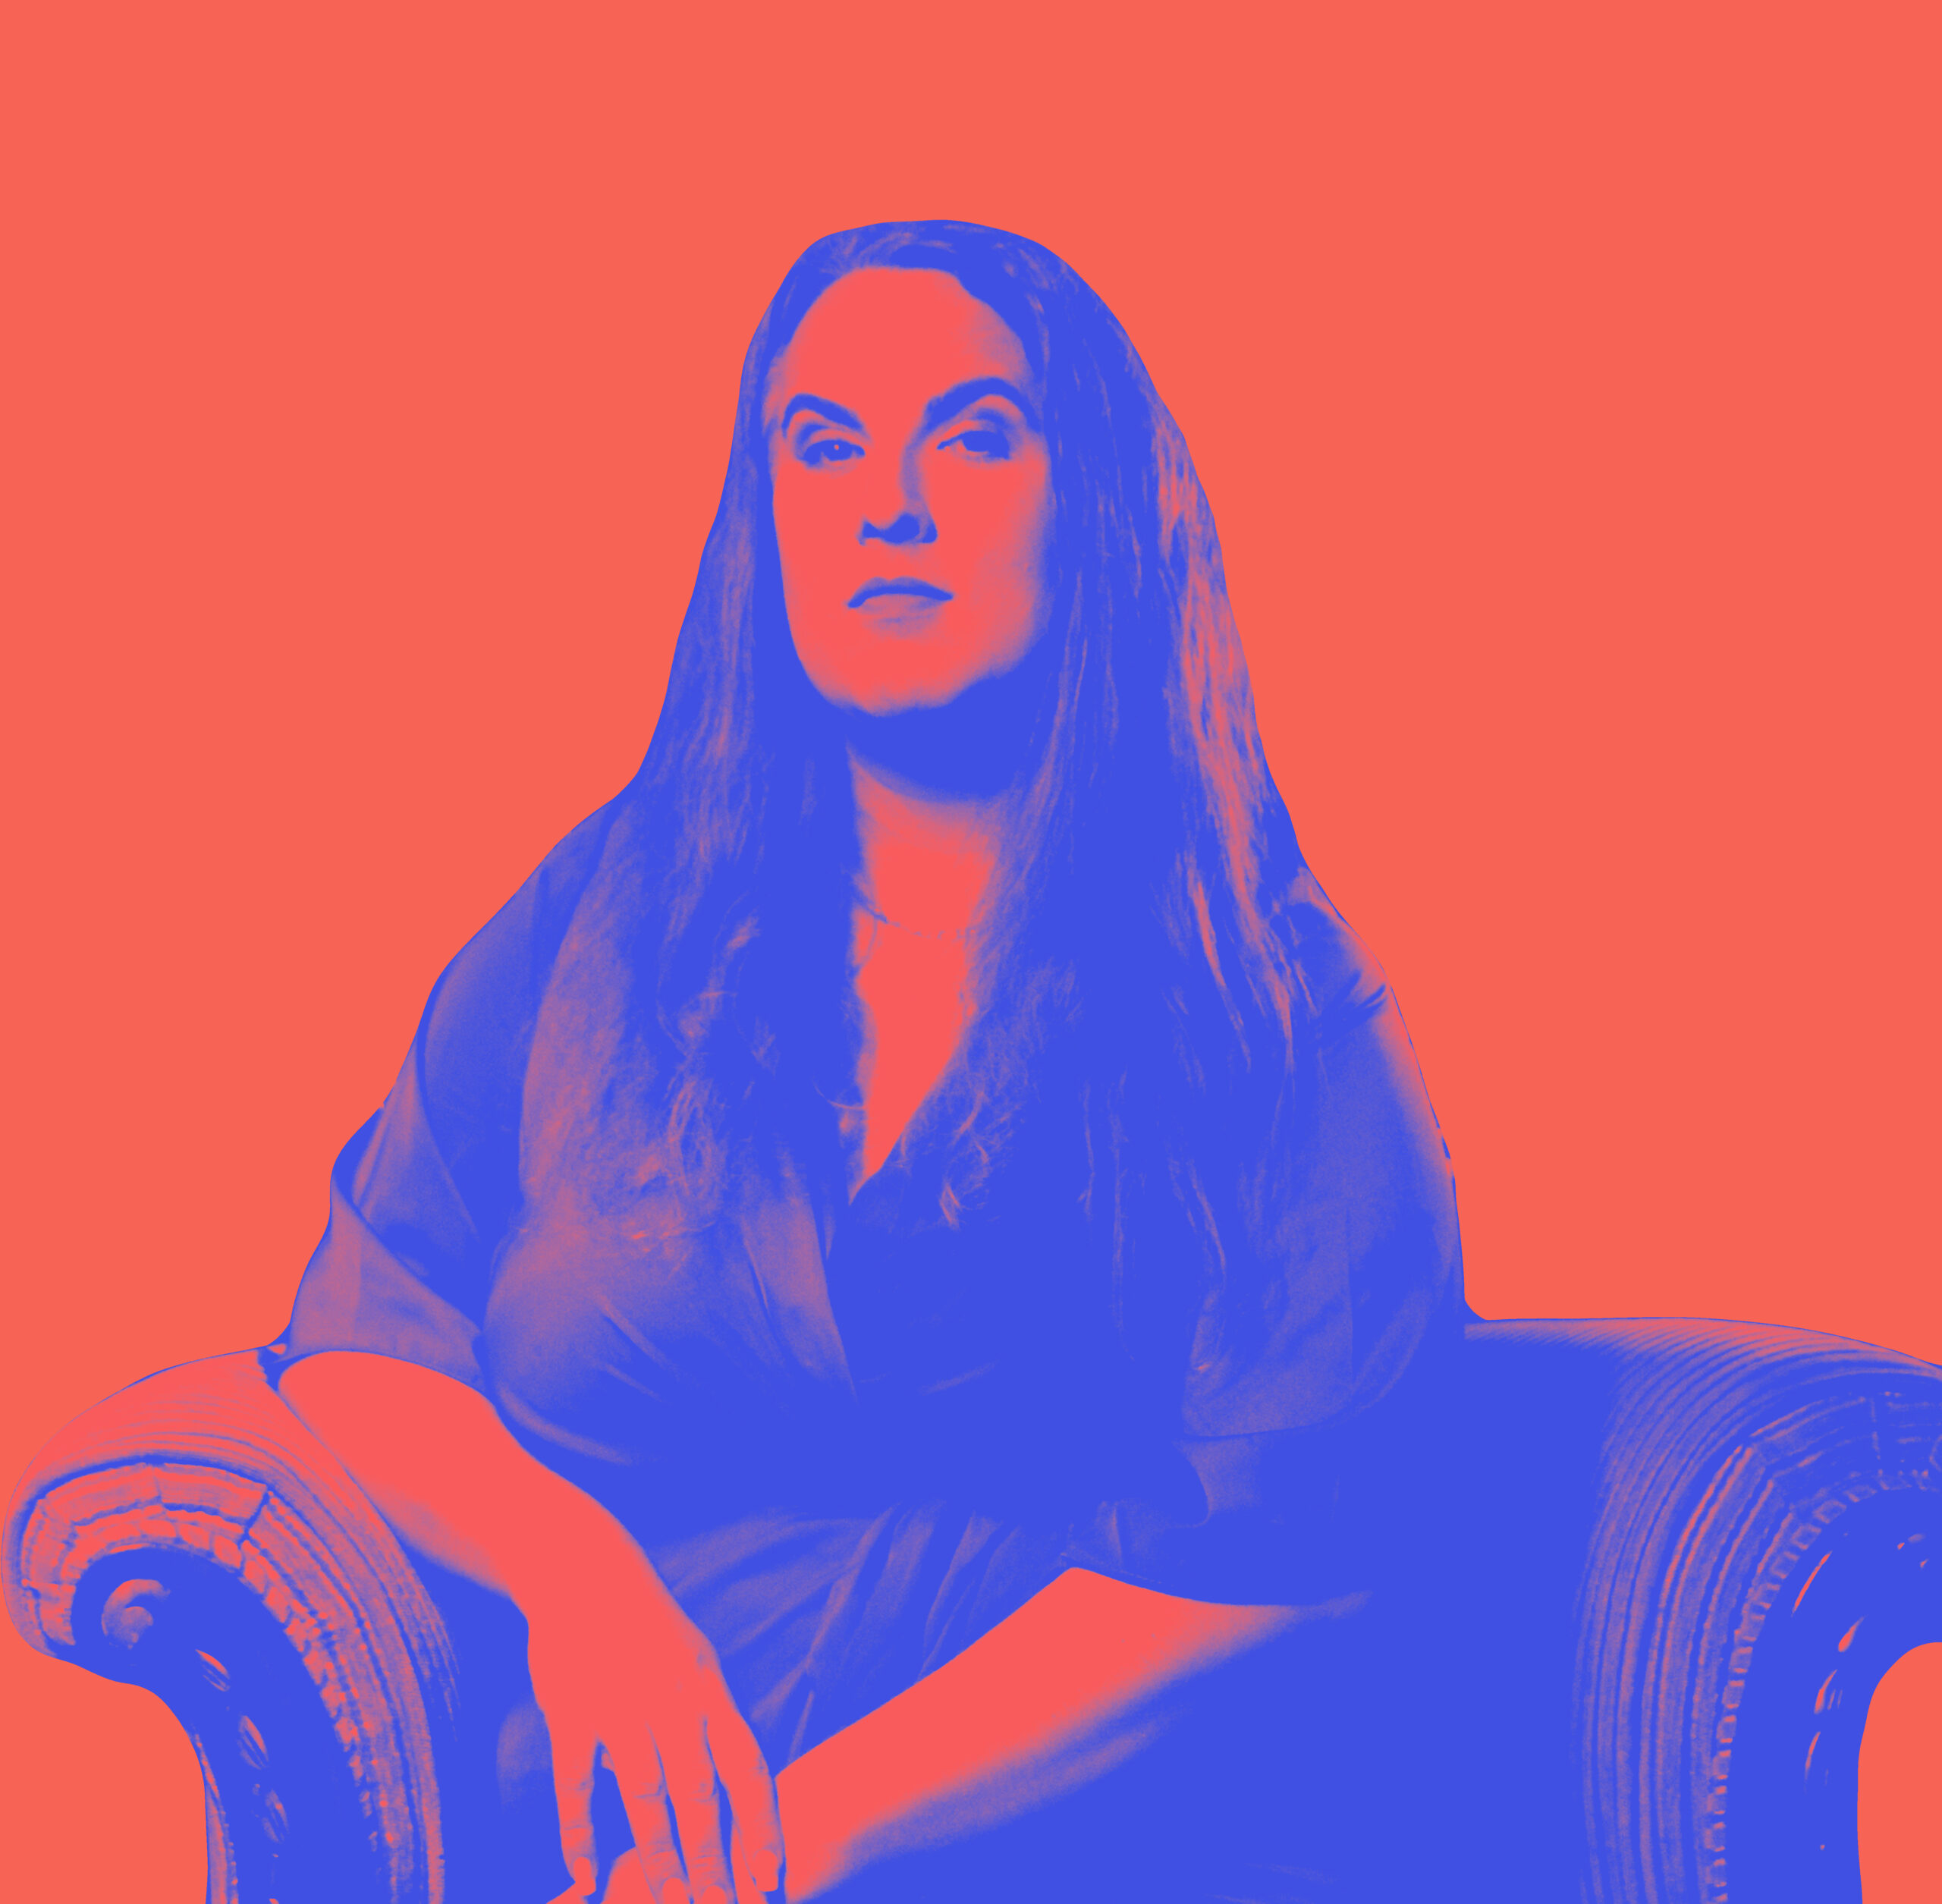 A duo-toned image of Anna Piper Scott as JK, the background is a hot orange and the person and arm chair are bright blue